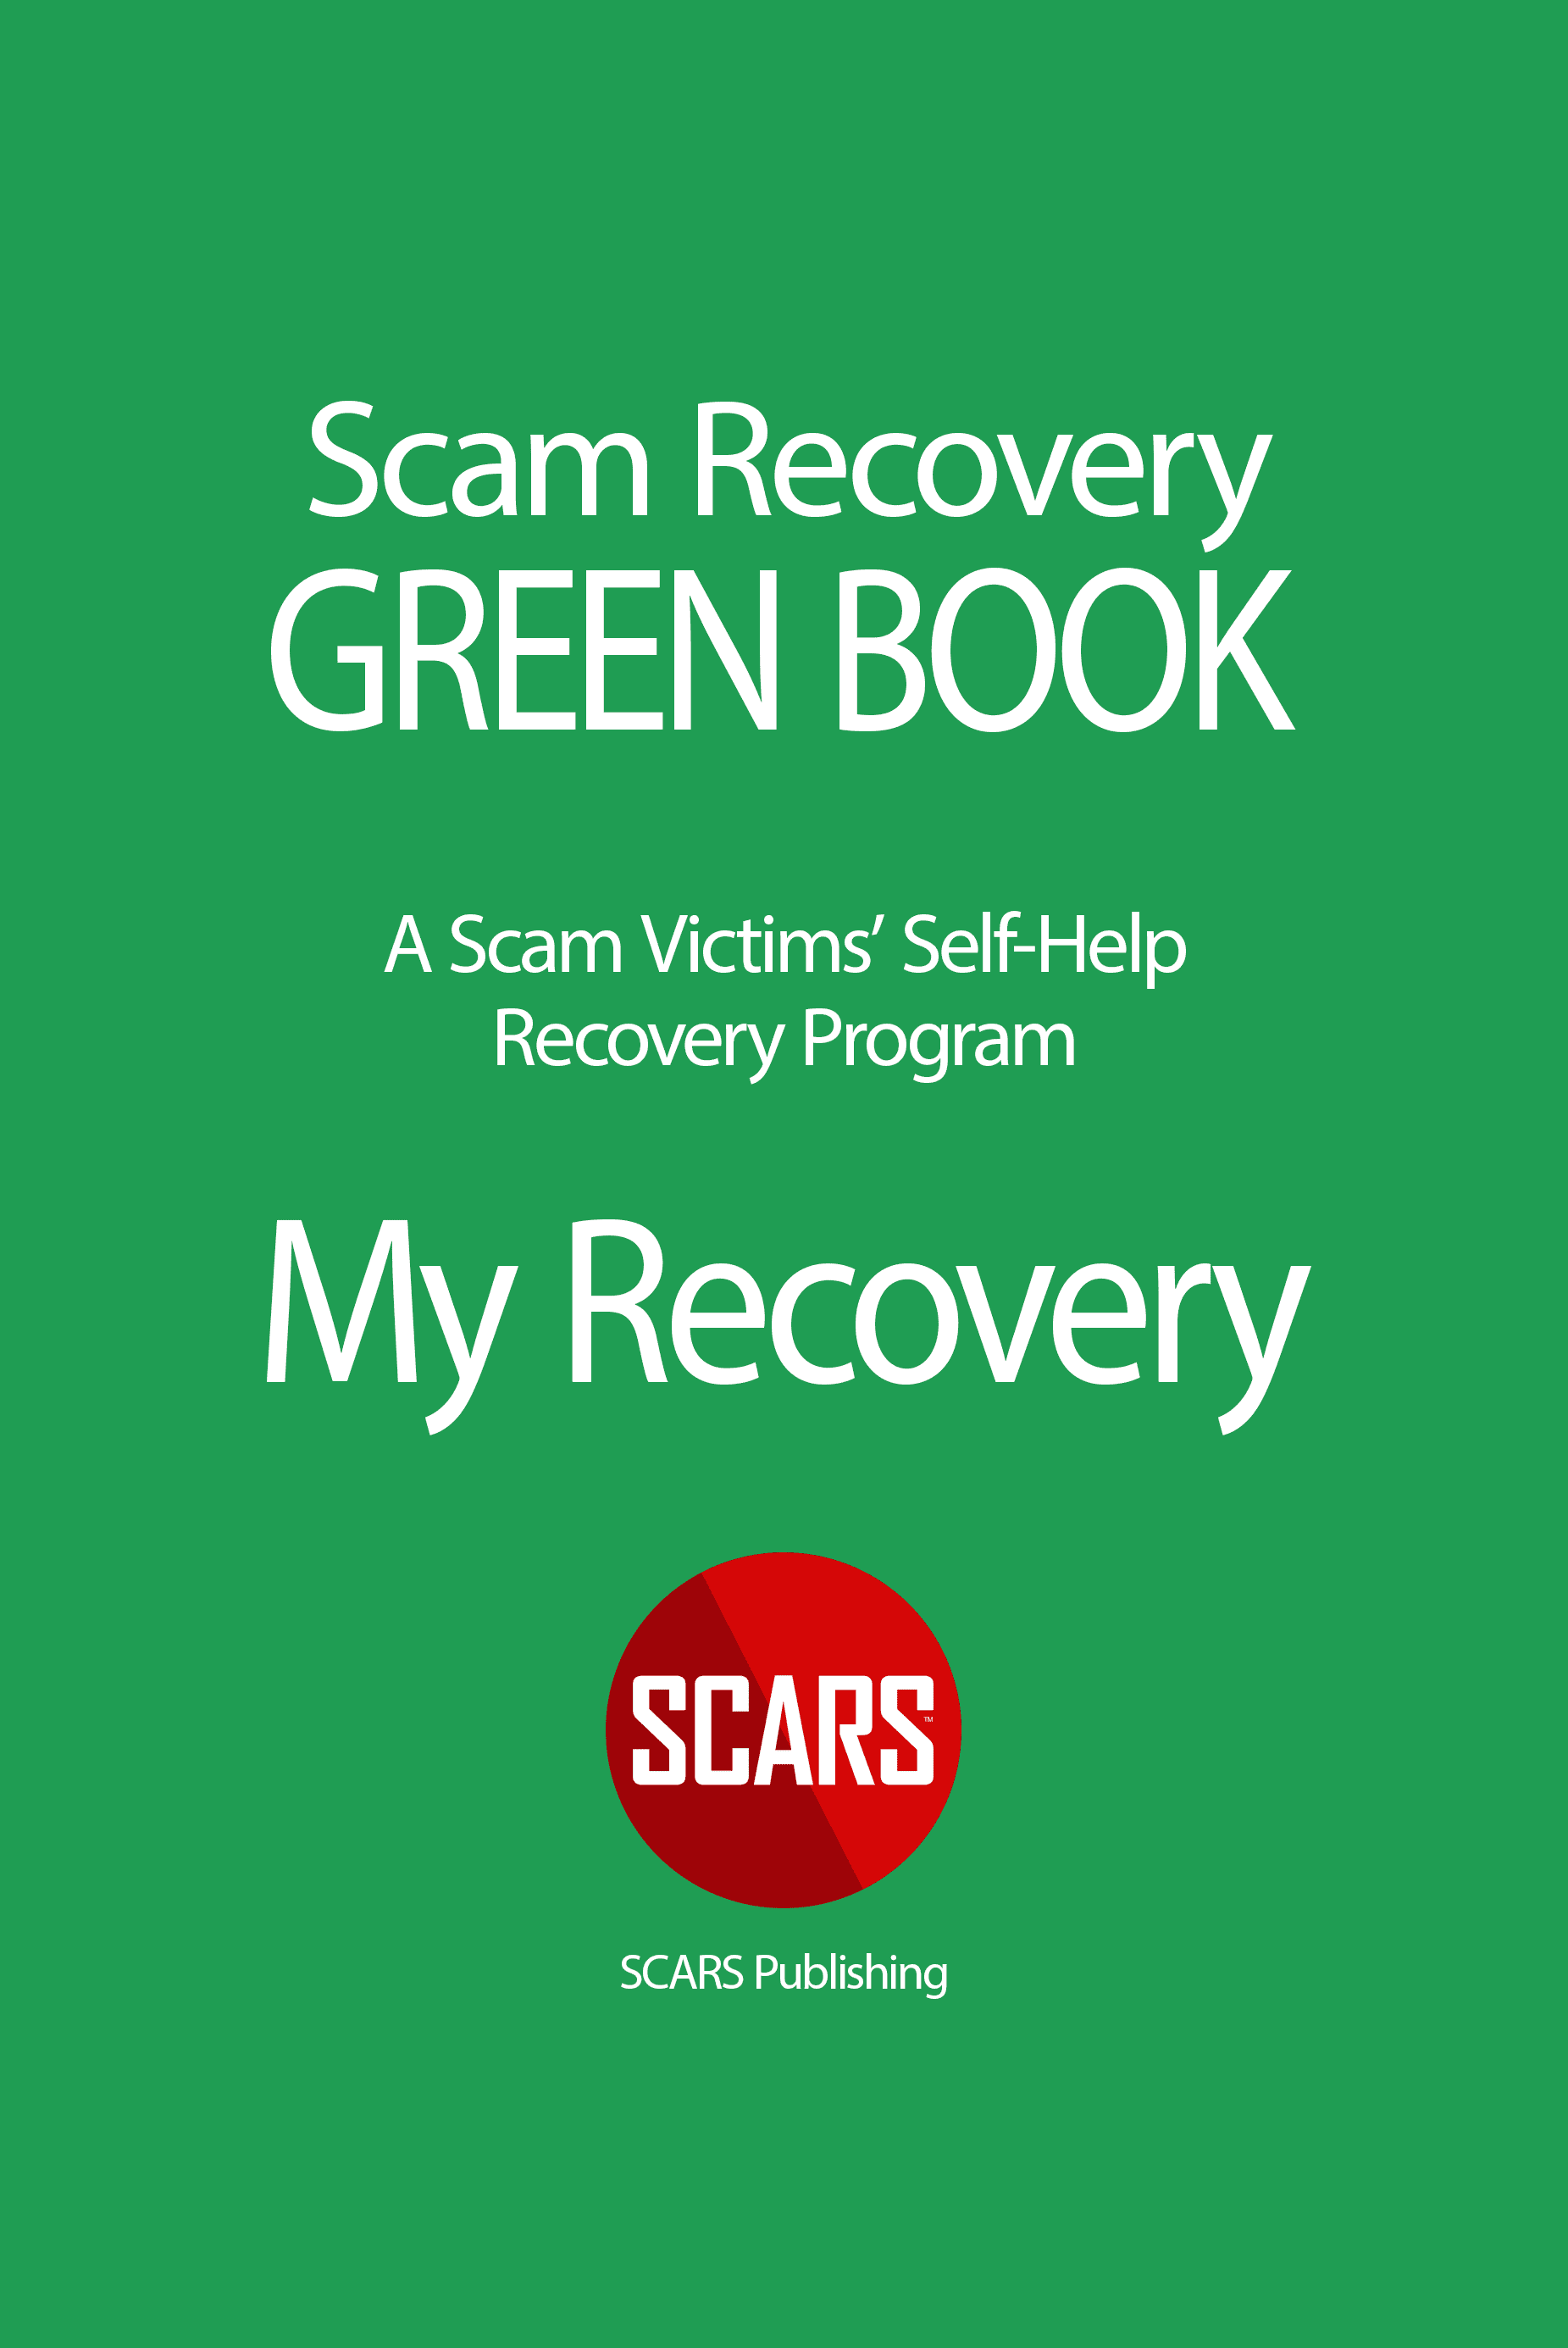 The SCARS Steps - SCARS GREEN BOOK - Scam Victims Recovery Program Guide Book